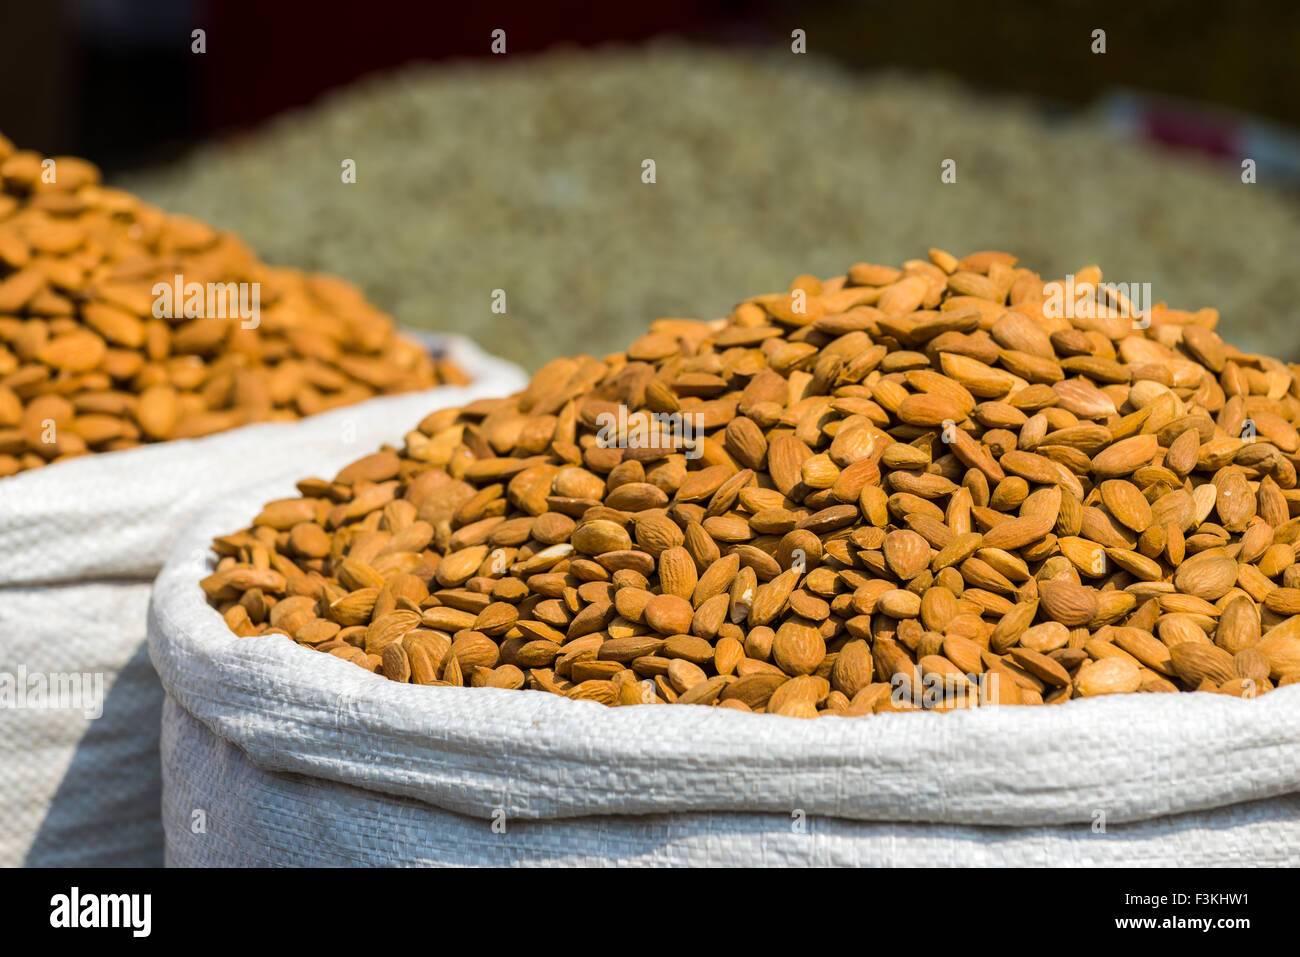 Almonds are displayed in a sack in the Old Delhi spice market Stock Photo